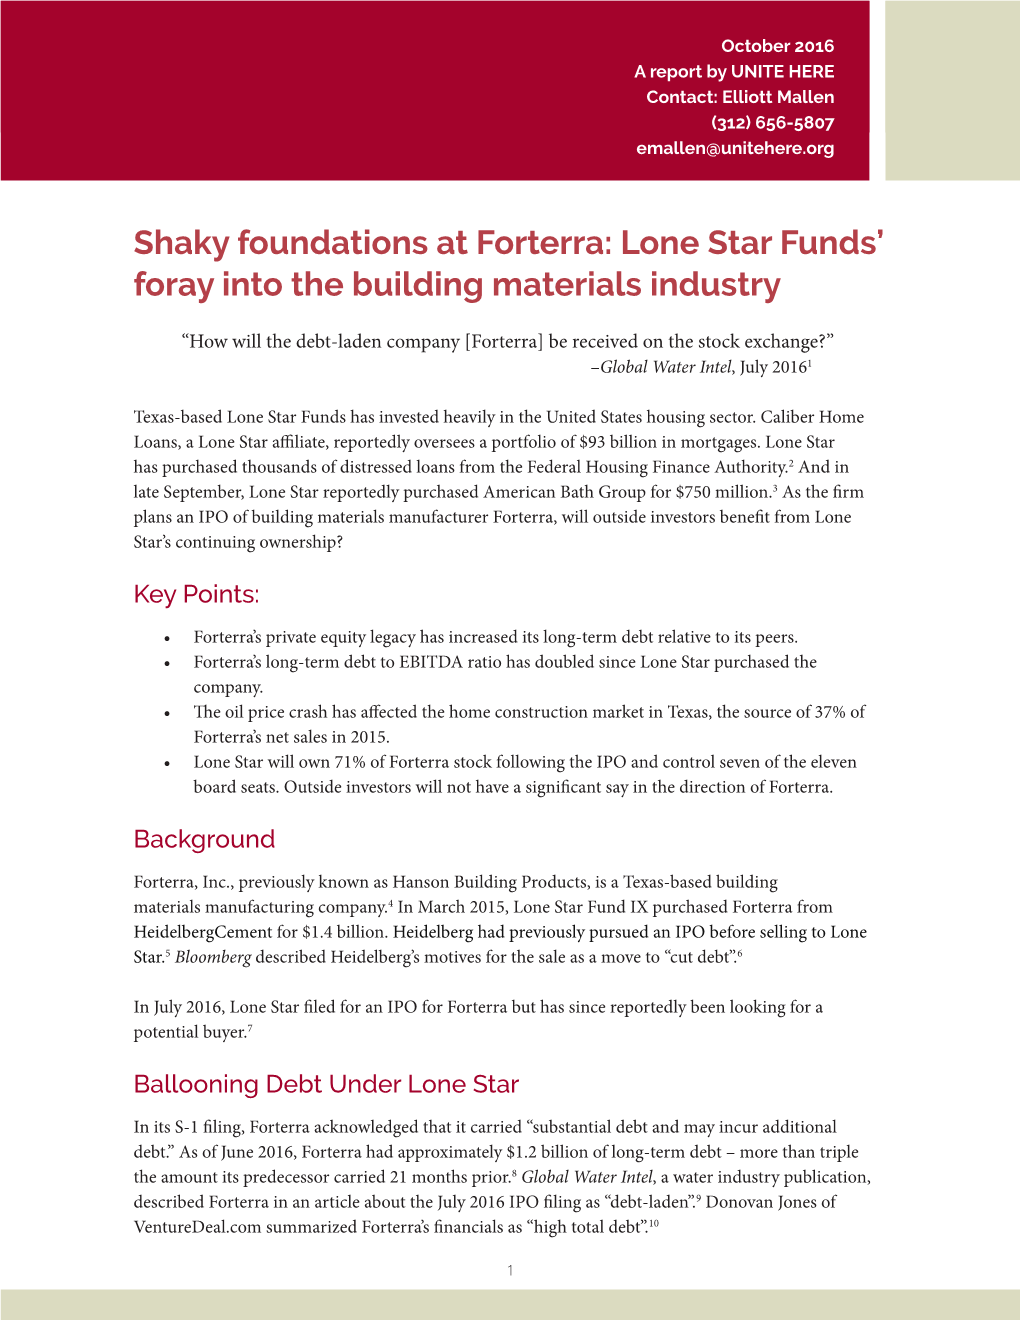 Shaky Foundations at Forterra: Lone Star Funds' Foray Into the Building